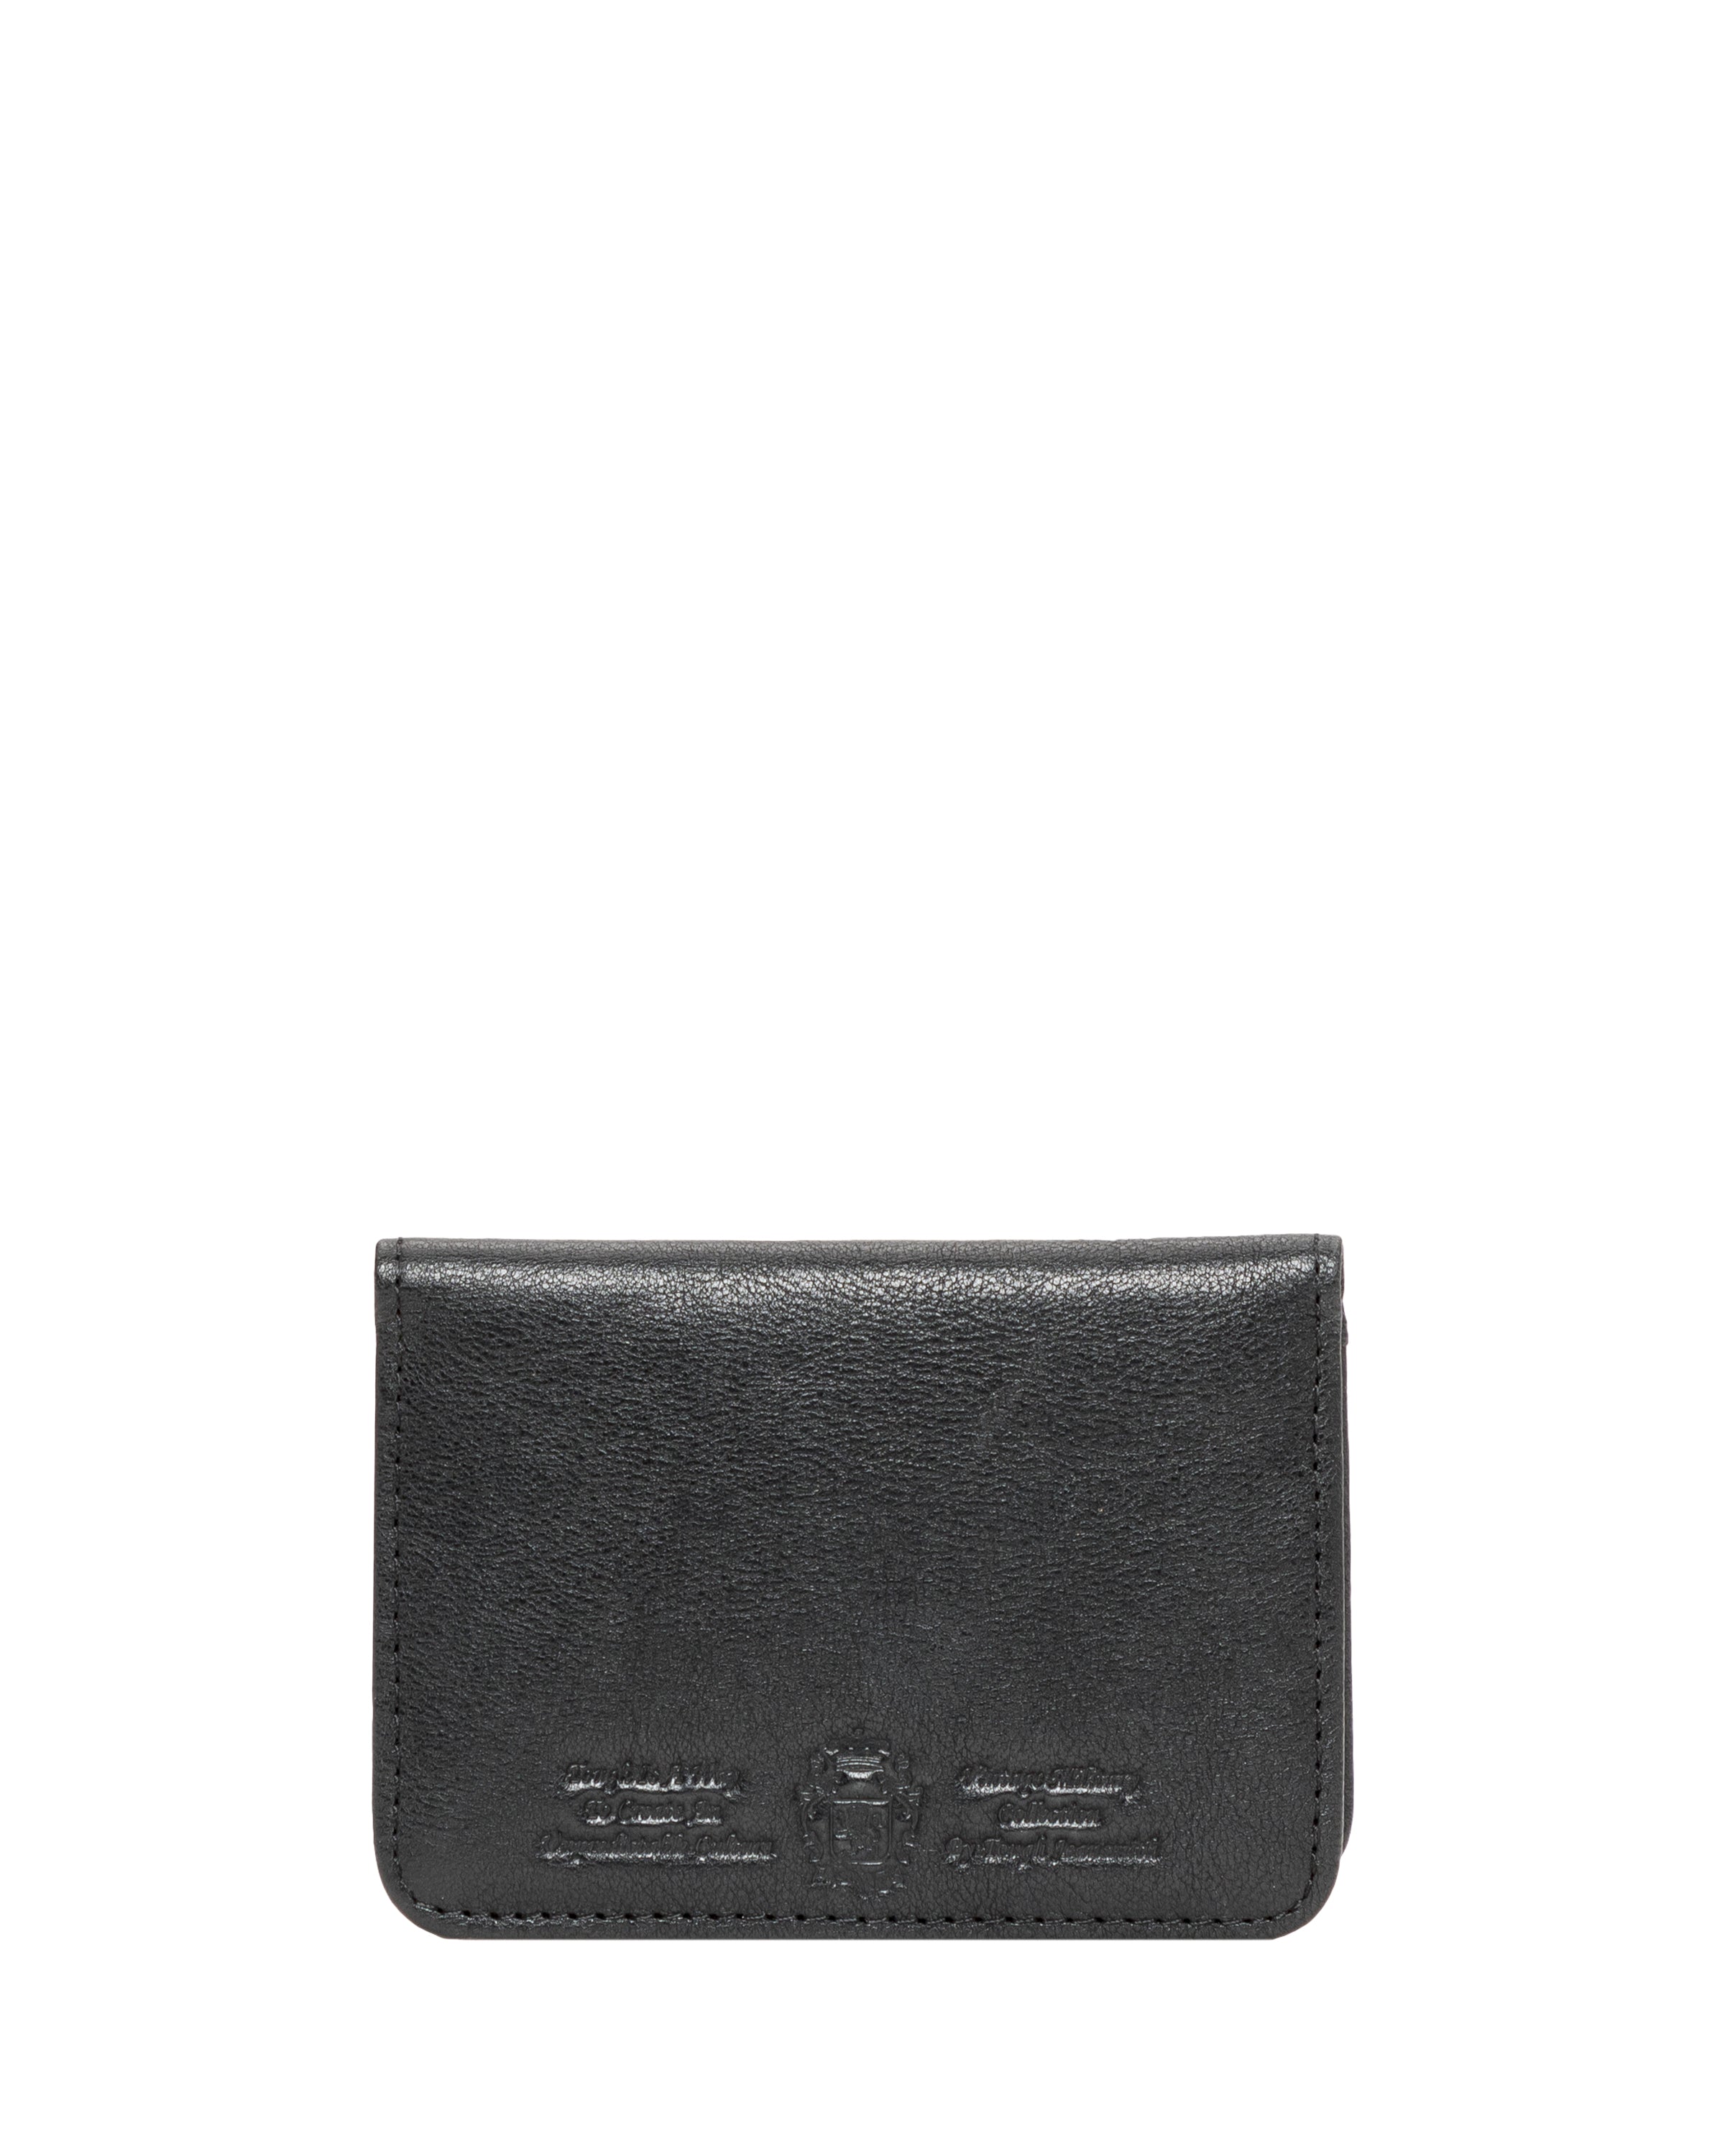 TOUGH JEANSMITH business card holder #TW223-013